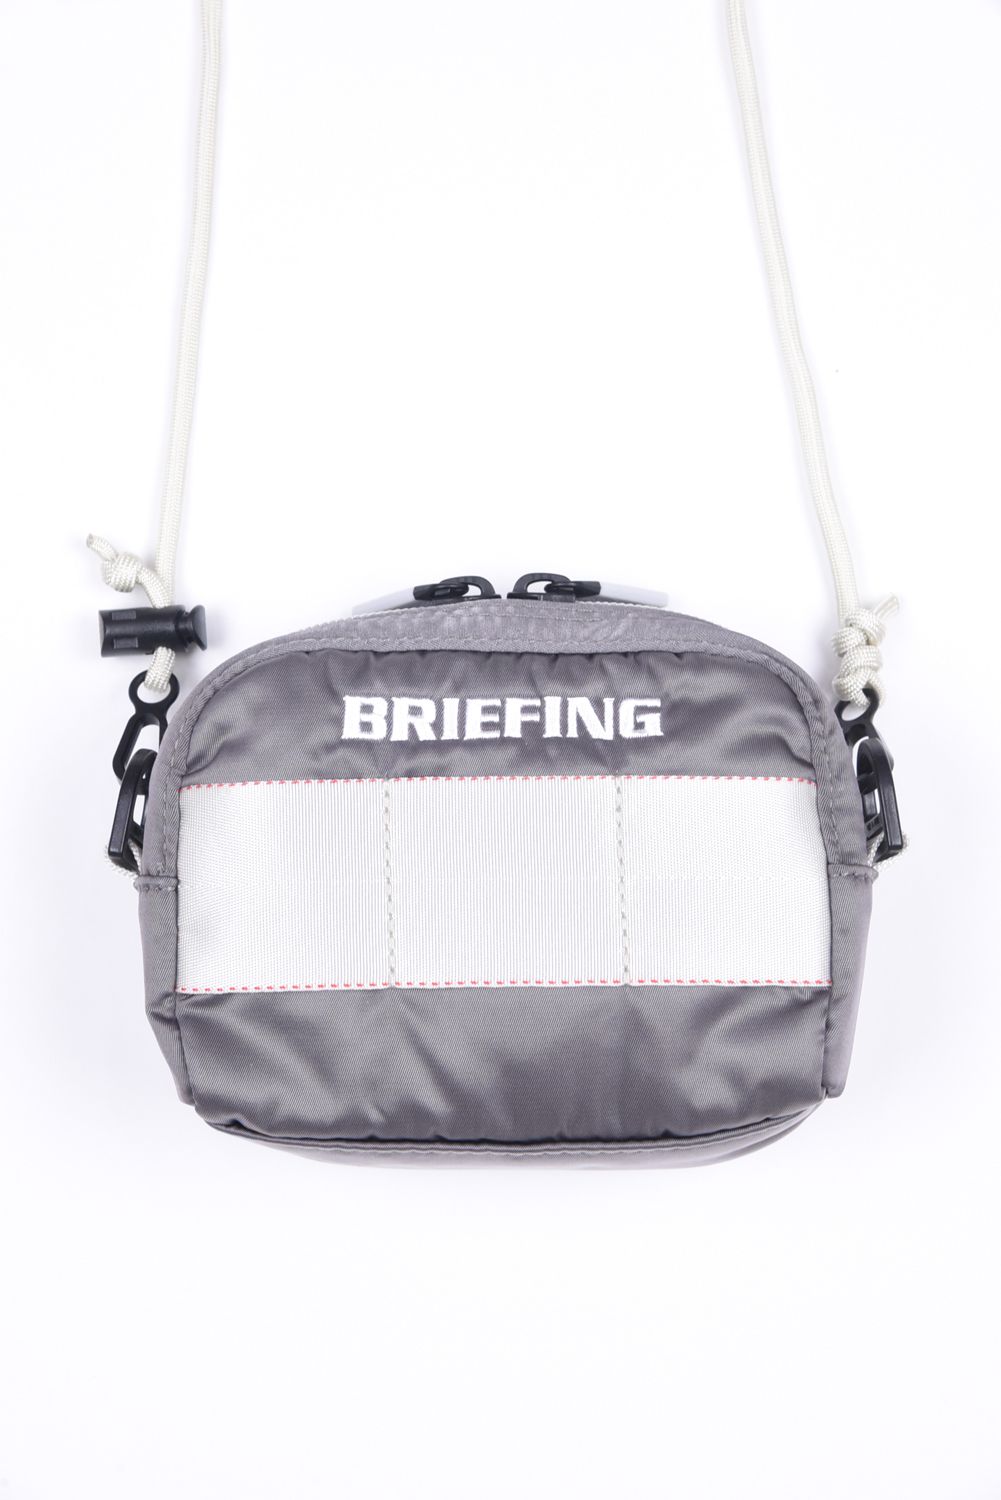 BRIEFING - 【エコツイル】 3WAY POUCH GOLF ECO TWILL ...